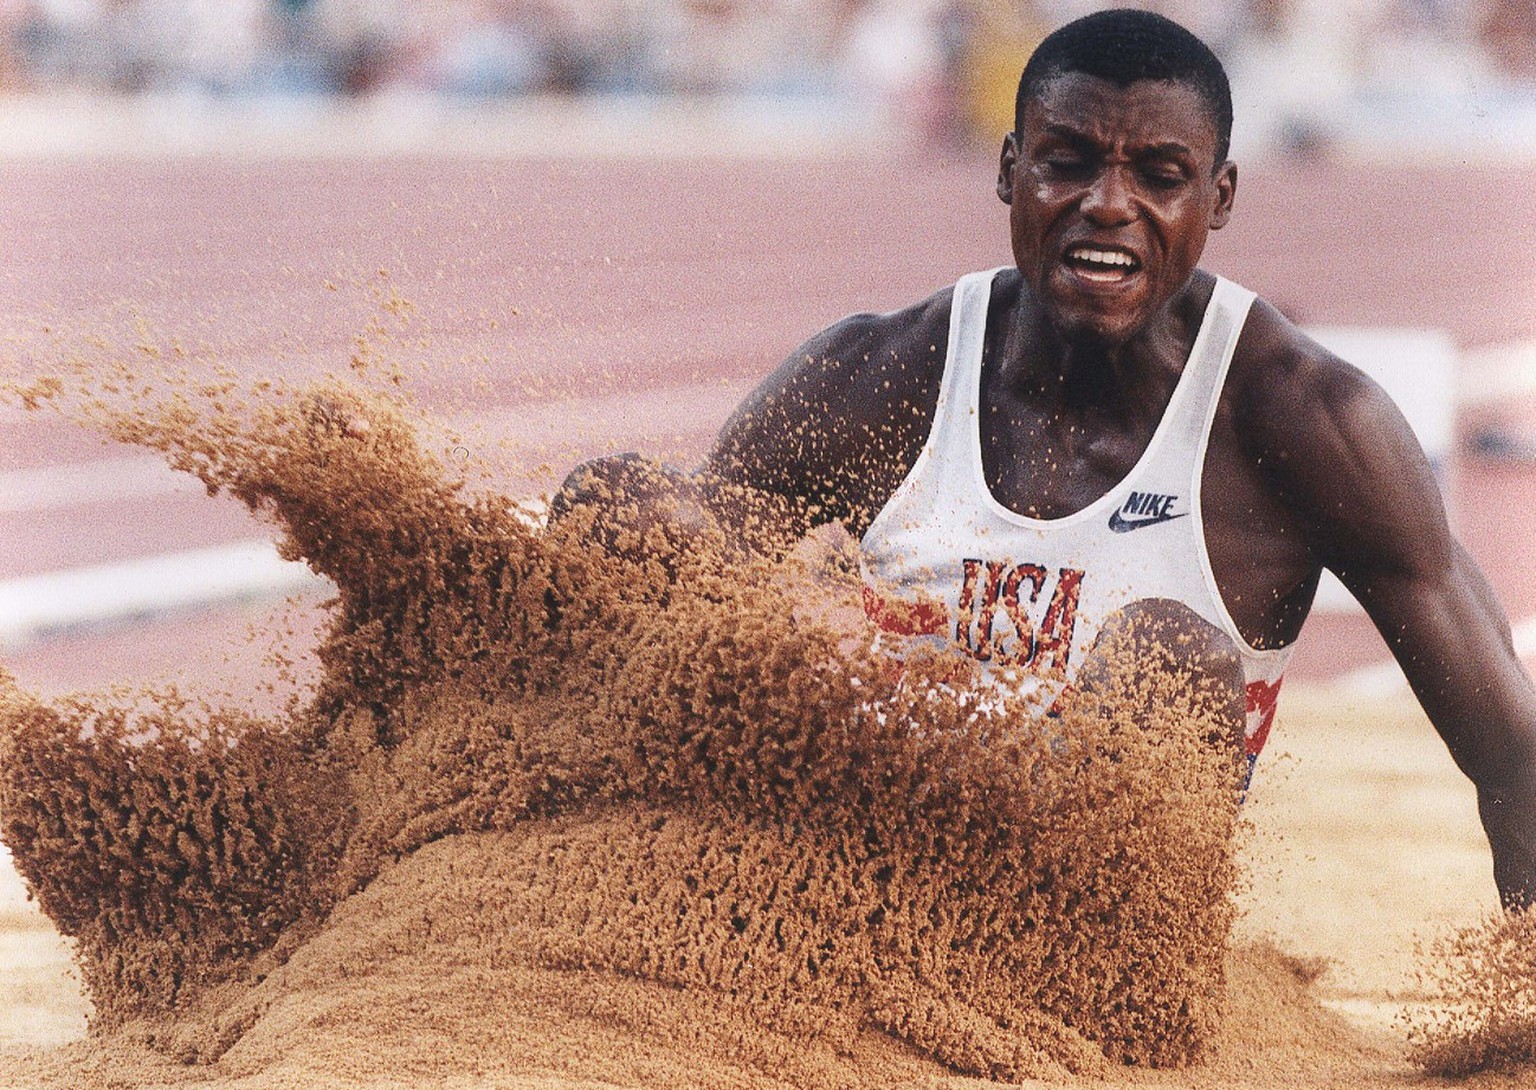 USA's Carl Lewis hits the sand on his fifth jump during the long jump competition at the Summer Olympics in Barcelona Thursday, Aug. 6, 1992. Lewis won the gold medal in the event. (AP Photo/Eric Risb ...